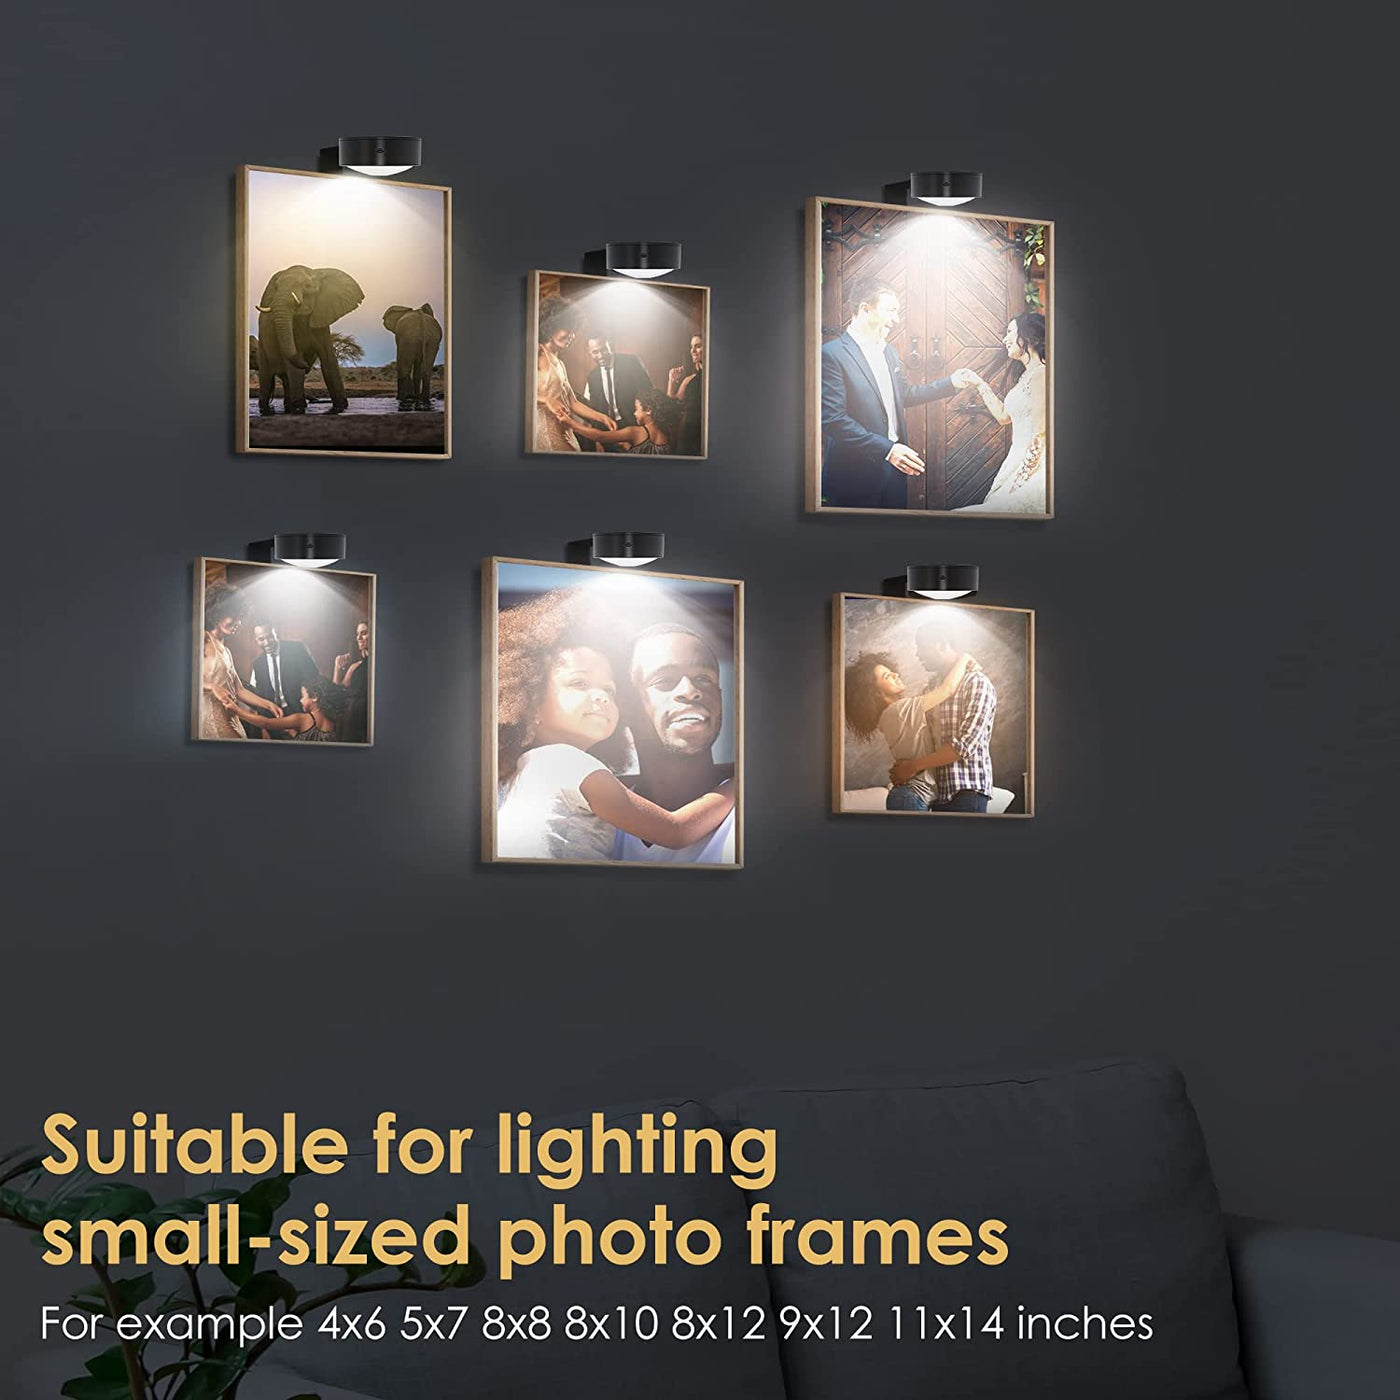 3-Pack Picture Light Battery Operated, Led Lights with Remote